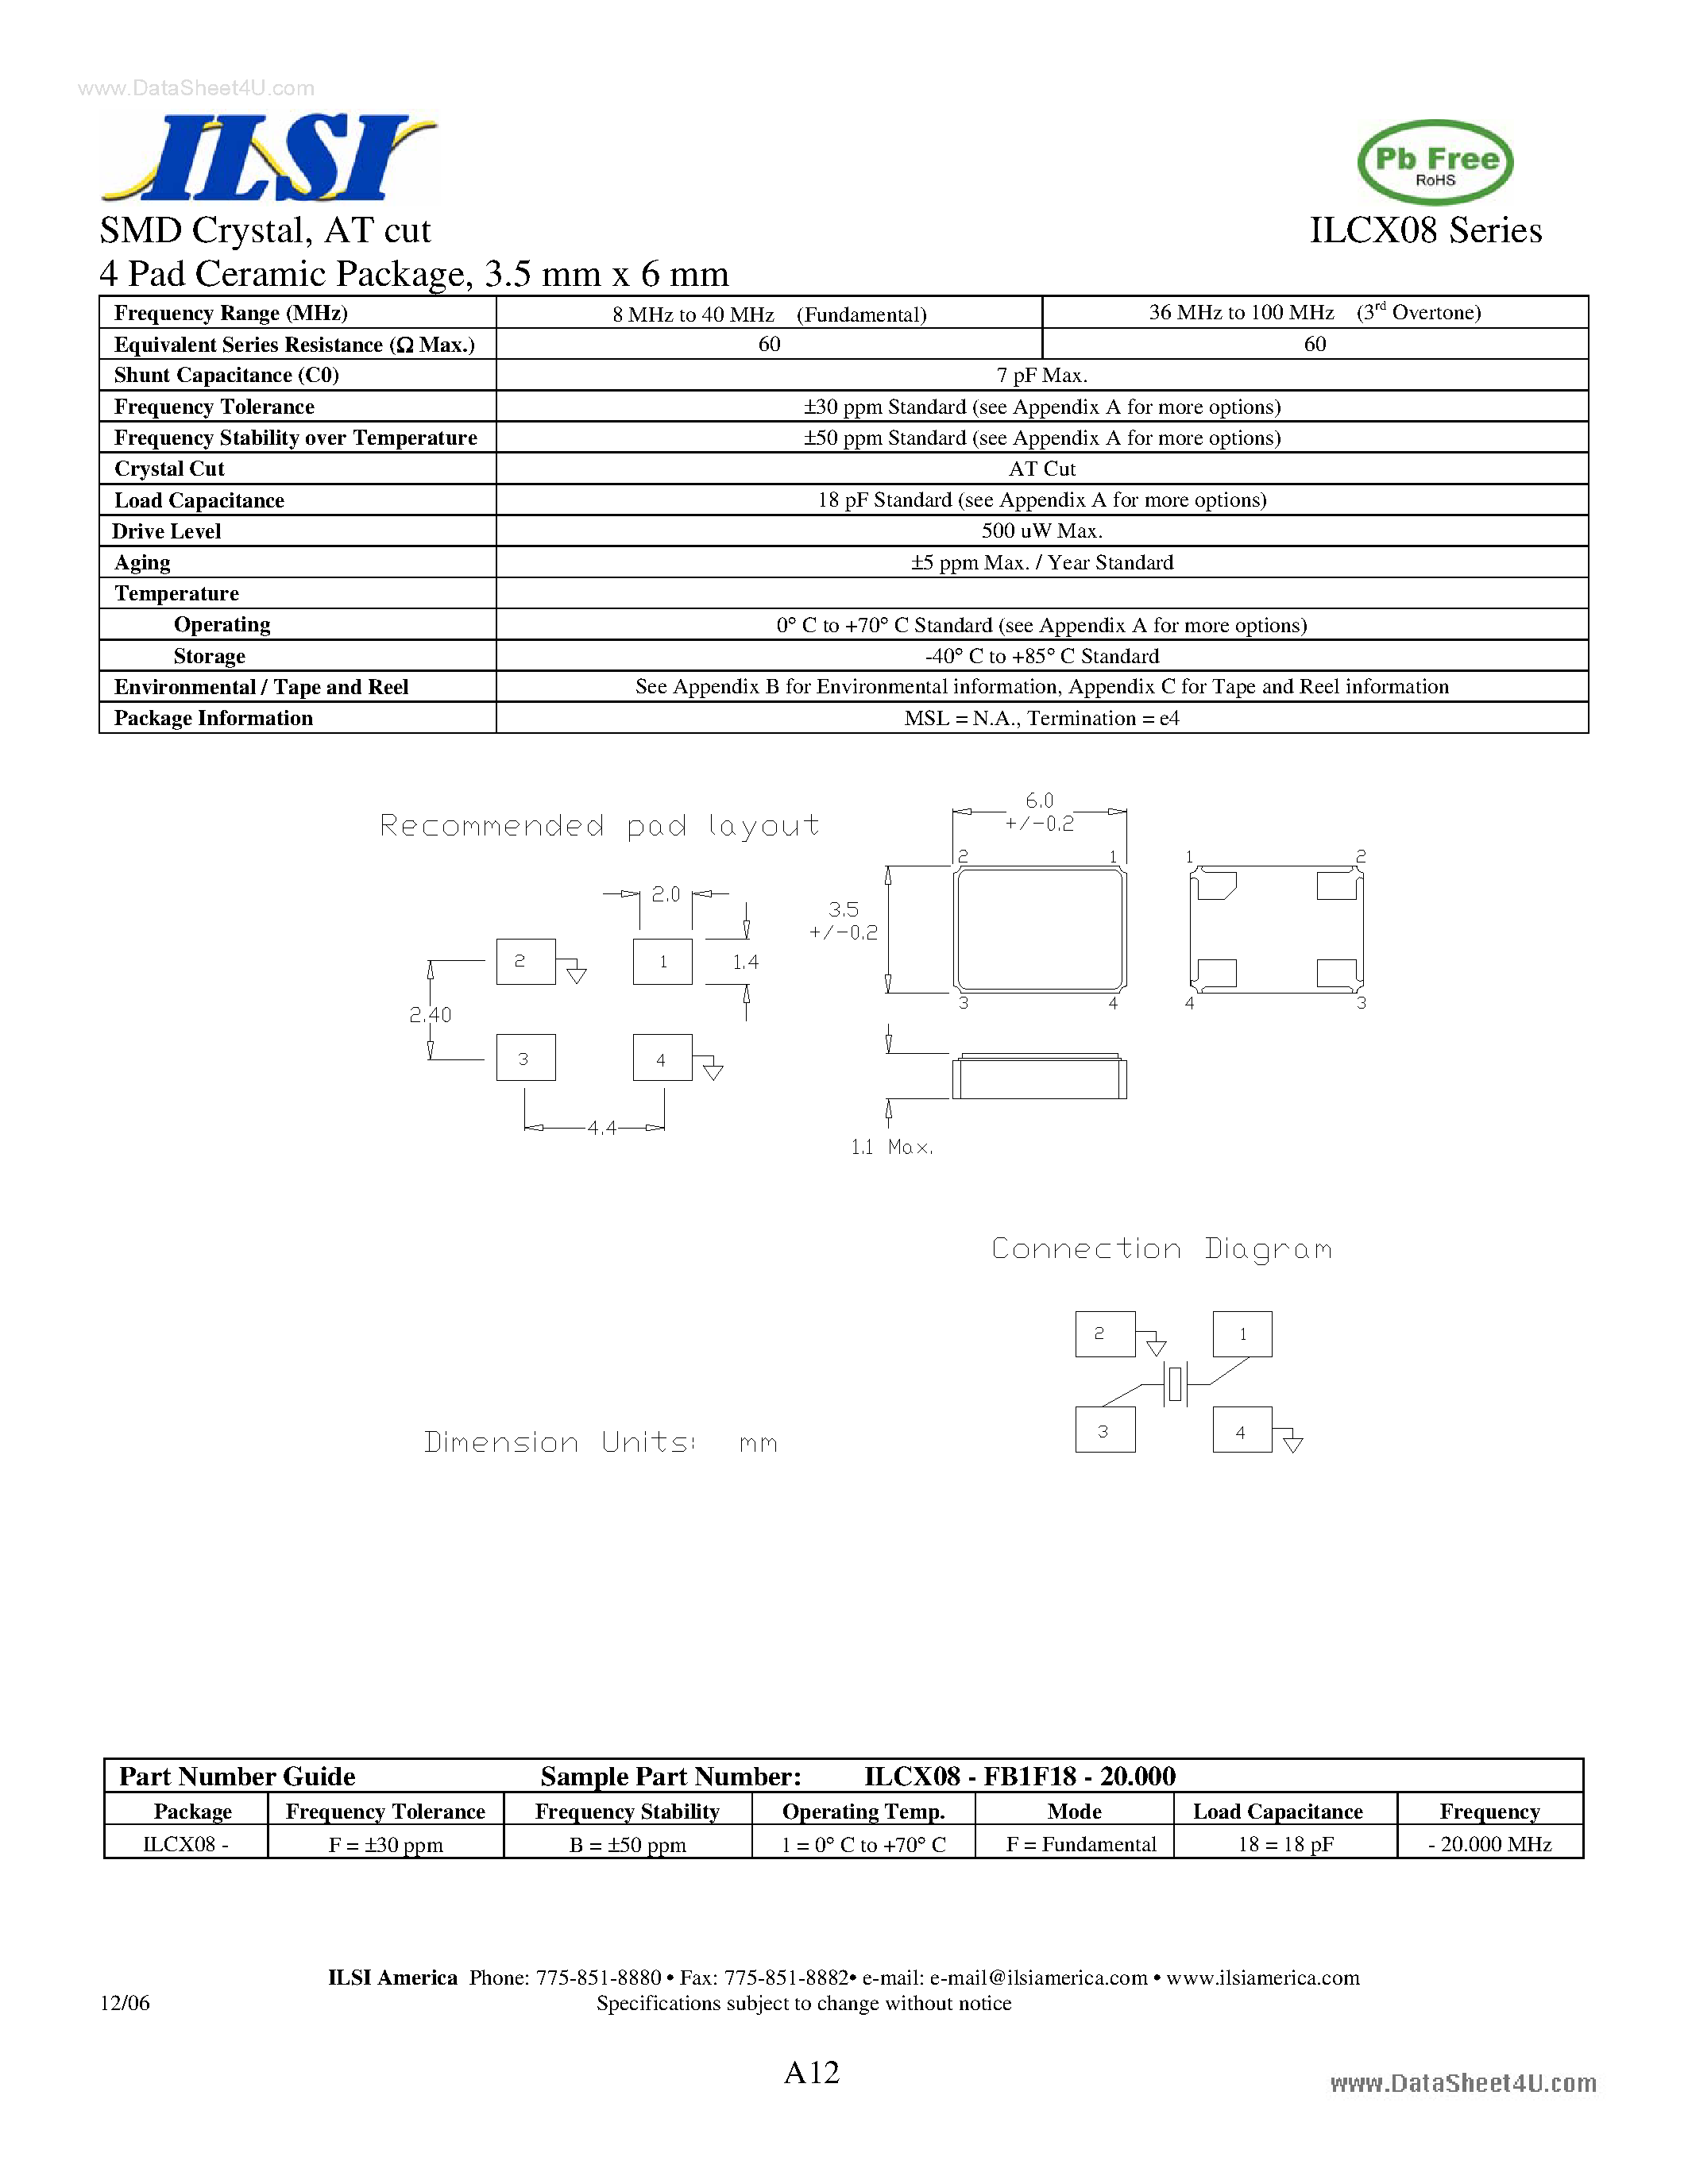 Datasheet ILCX08 - SMD Crystal page 1